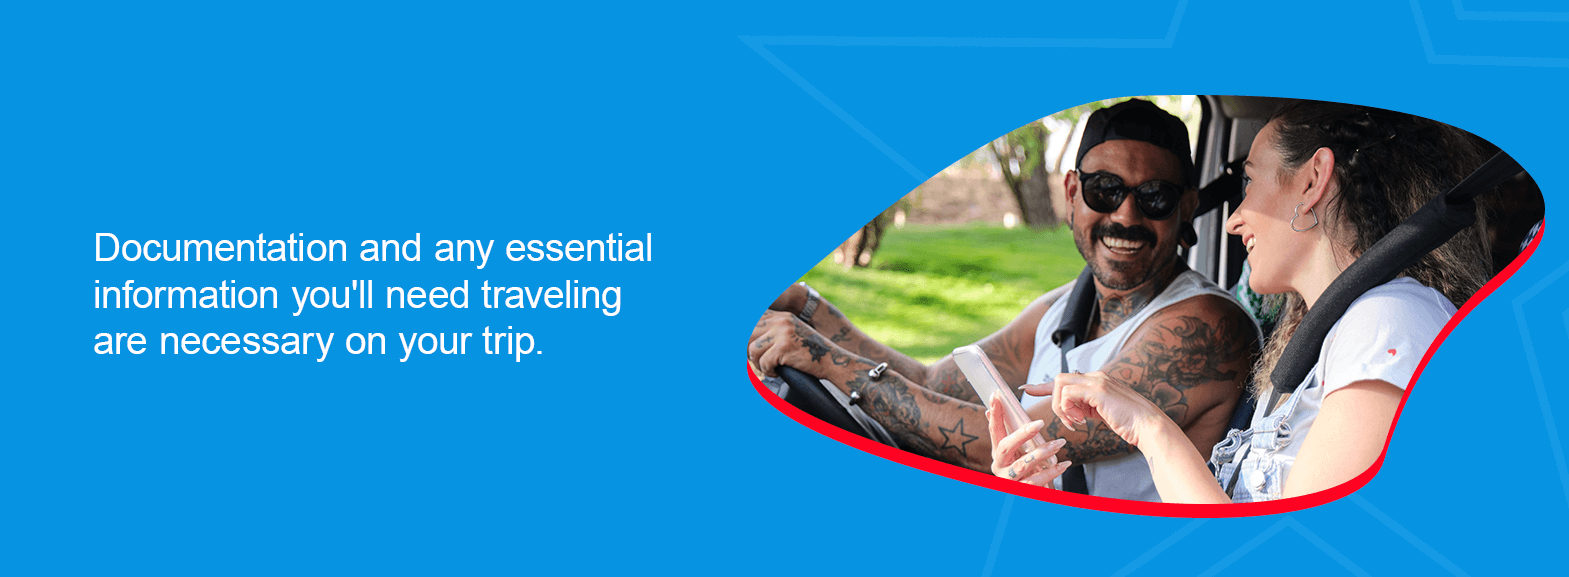 Documentation and any essential information you'll need traveling are necessary on your trip.